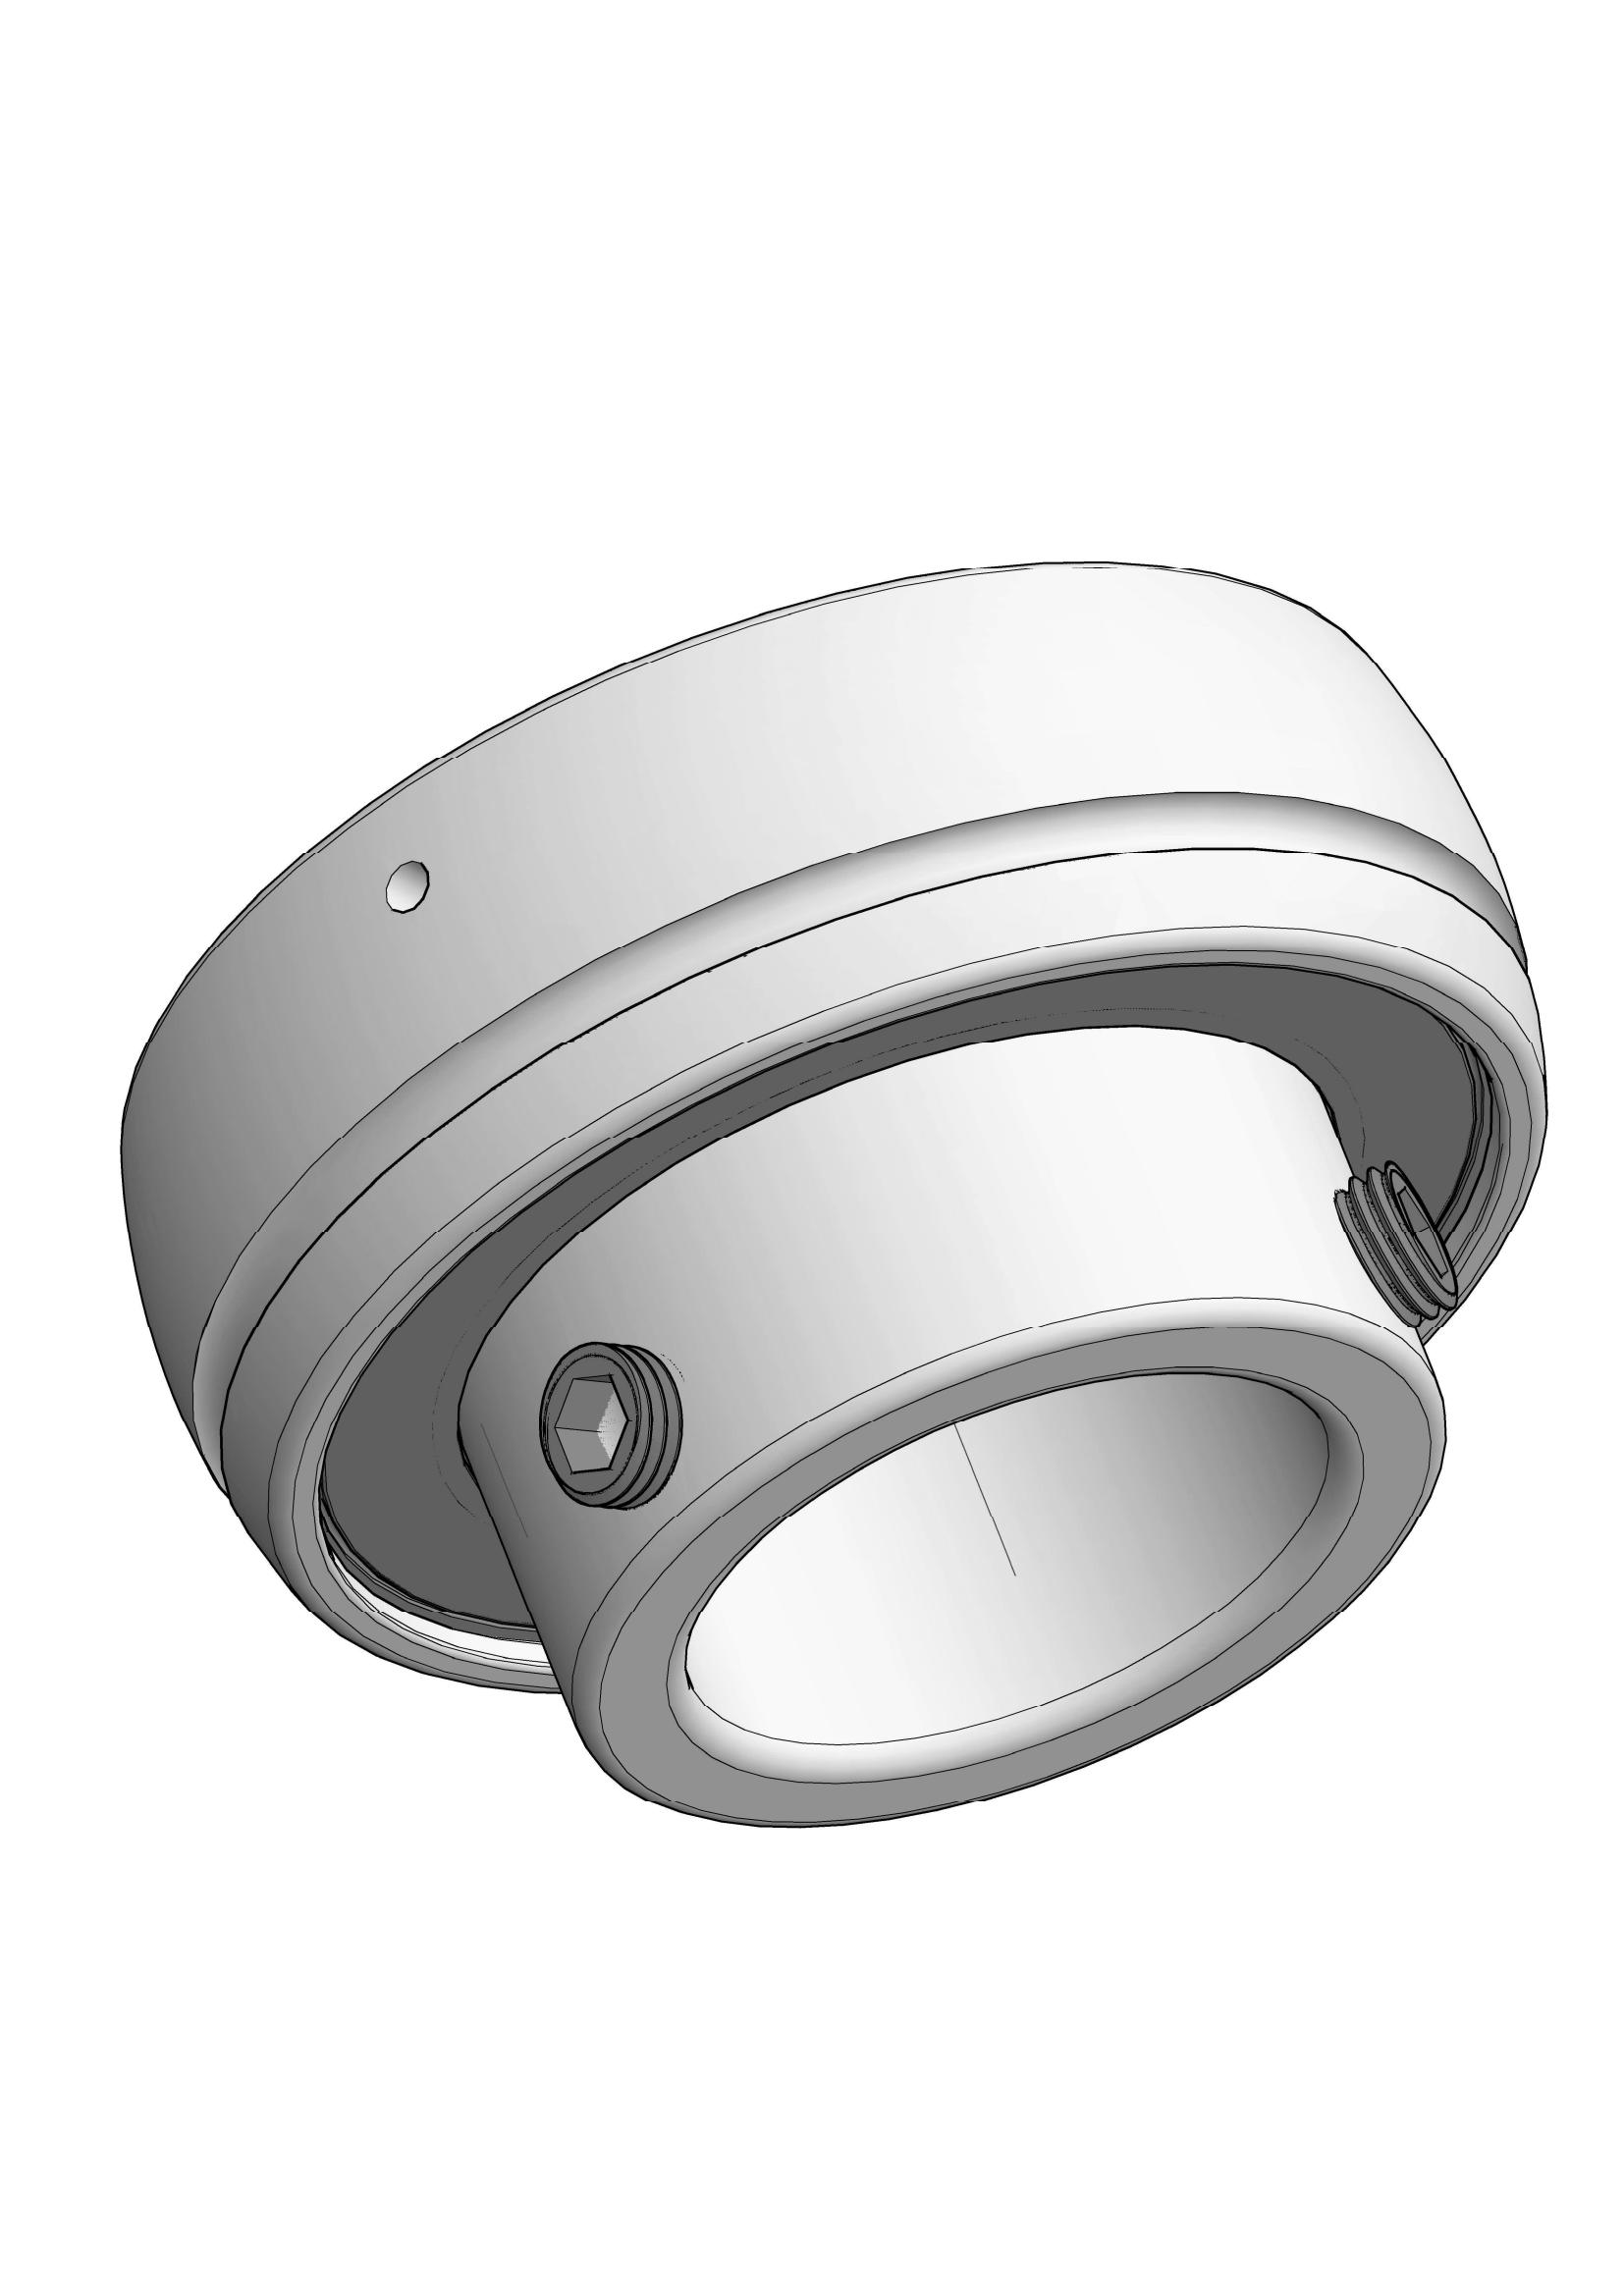 SB205 insert ball bearings with Eccentric Collar Lock with 25mm Bore